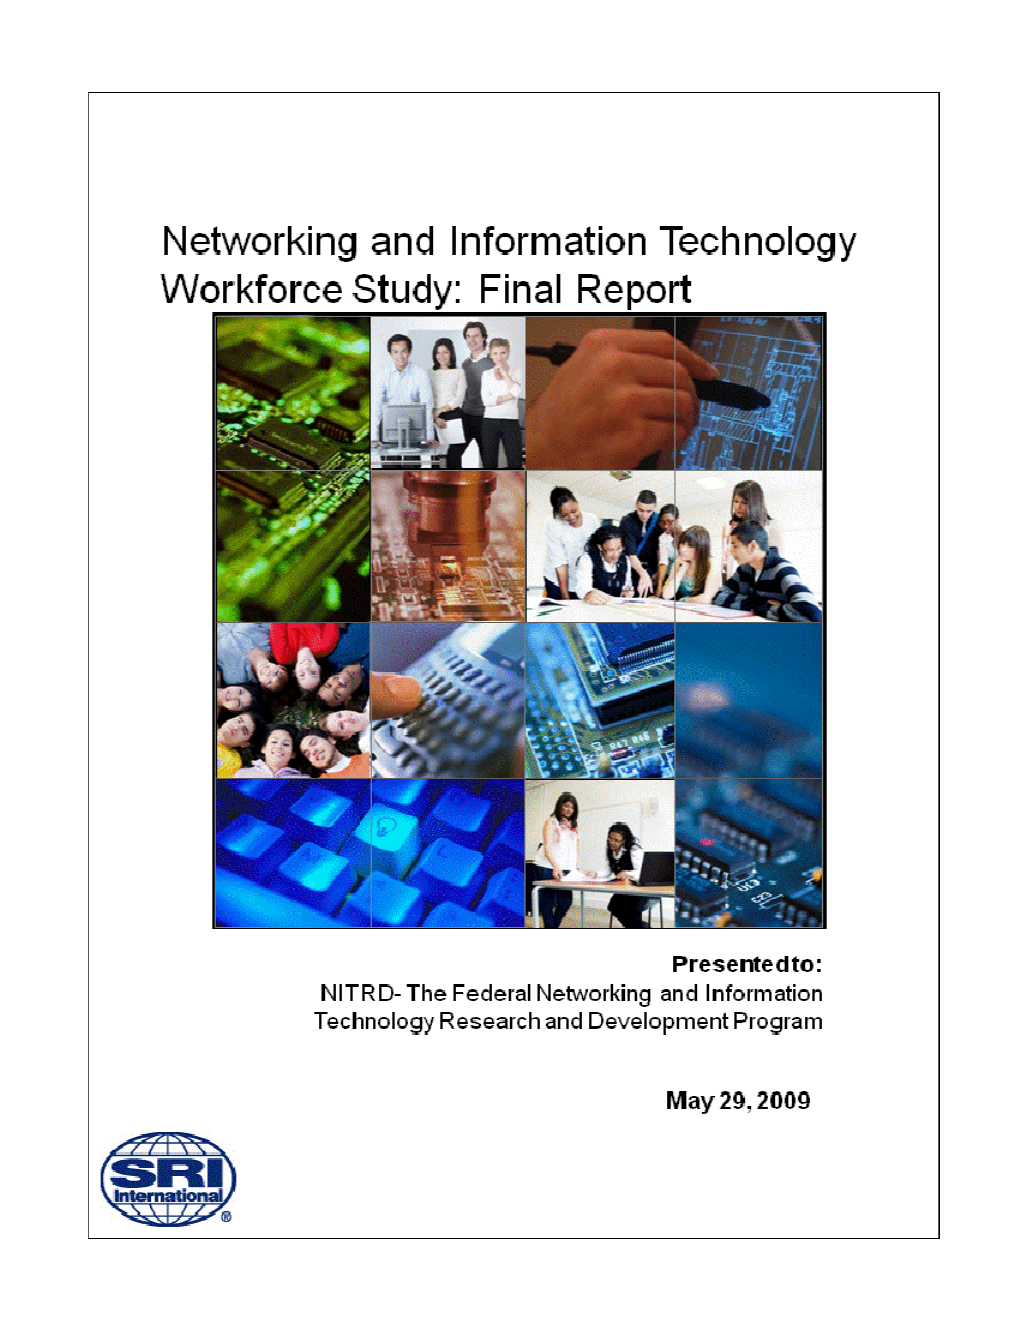 Networking and Information Technology Workforce Study